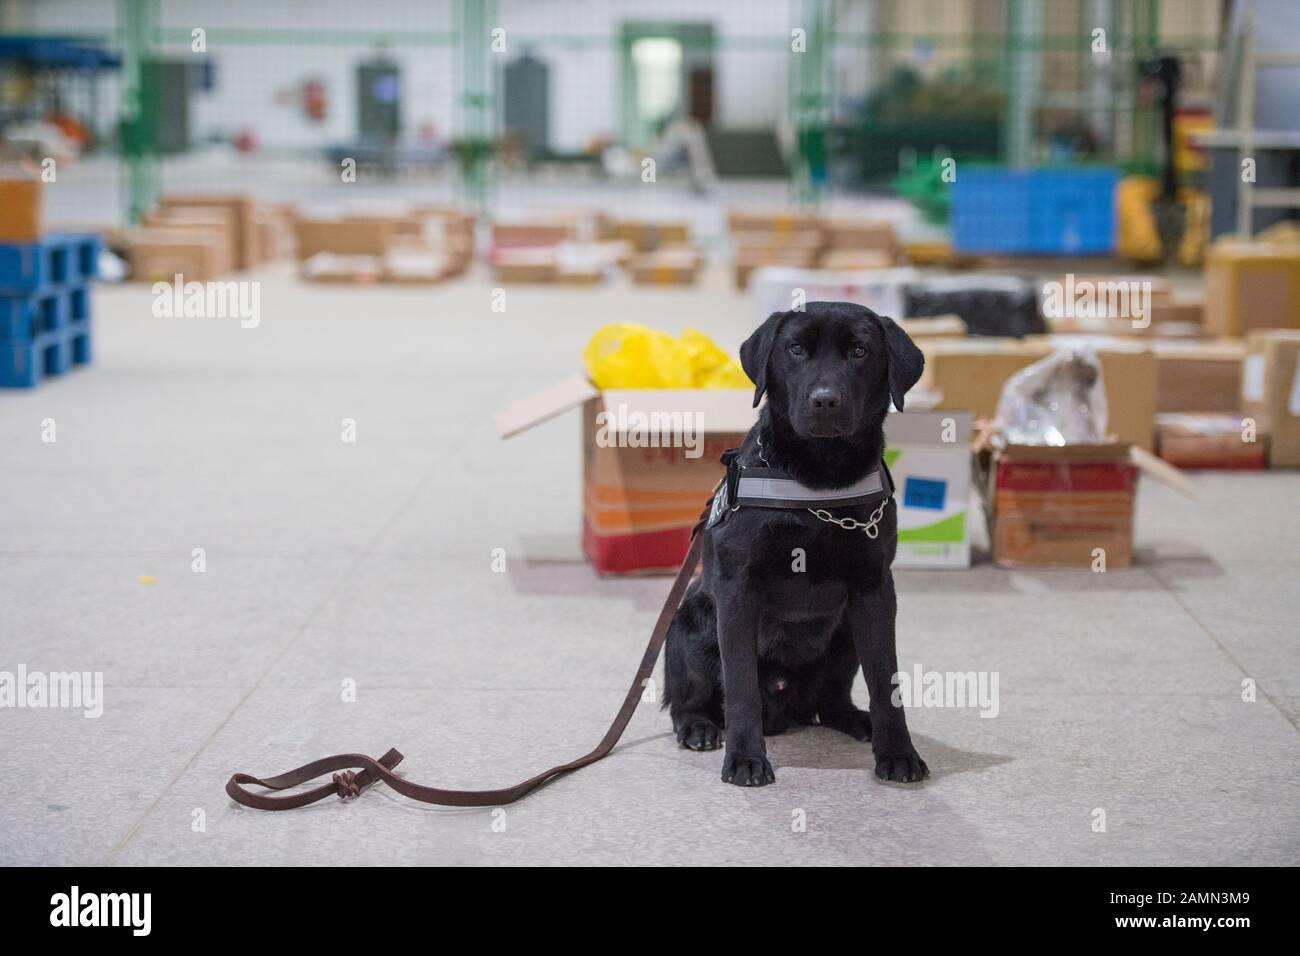 (200114) -- CHANGSHA, Jan. 14, 2020 (Xinhua) -- Photo taken on Jan. 10, 2020 shows sniffer dog 'Lufei' at Changsha supervision center for international mails in Changsha, capital of central China's Hunan Province. The sniffer dog 'Lufei' at the Changsha Customs has played an important role in detecting prohibited objects and preventing the spread of animal and plant diseases. In the year of 2019, sniffer dog 'Lufei' was on duty for 183 times, detecting 249 batches of hazardous materials. (Xinhua/Chen Sihan) Stock Photo